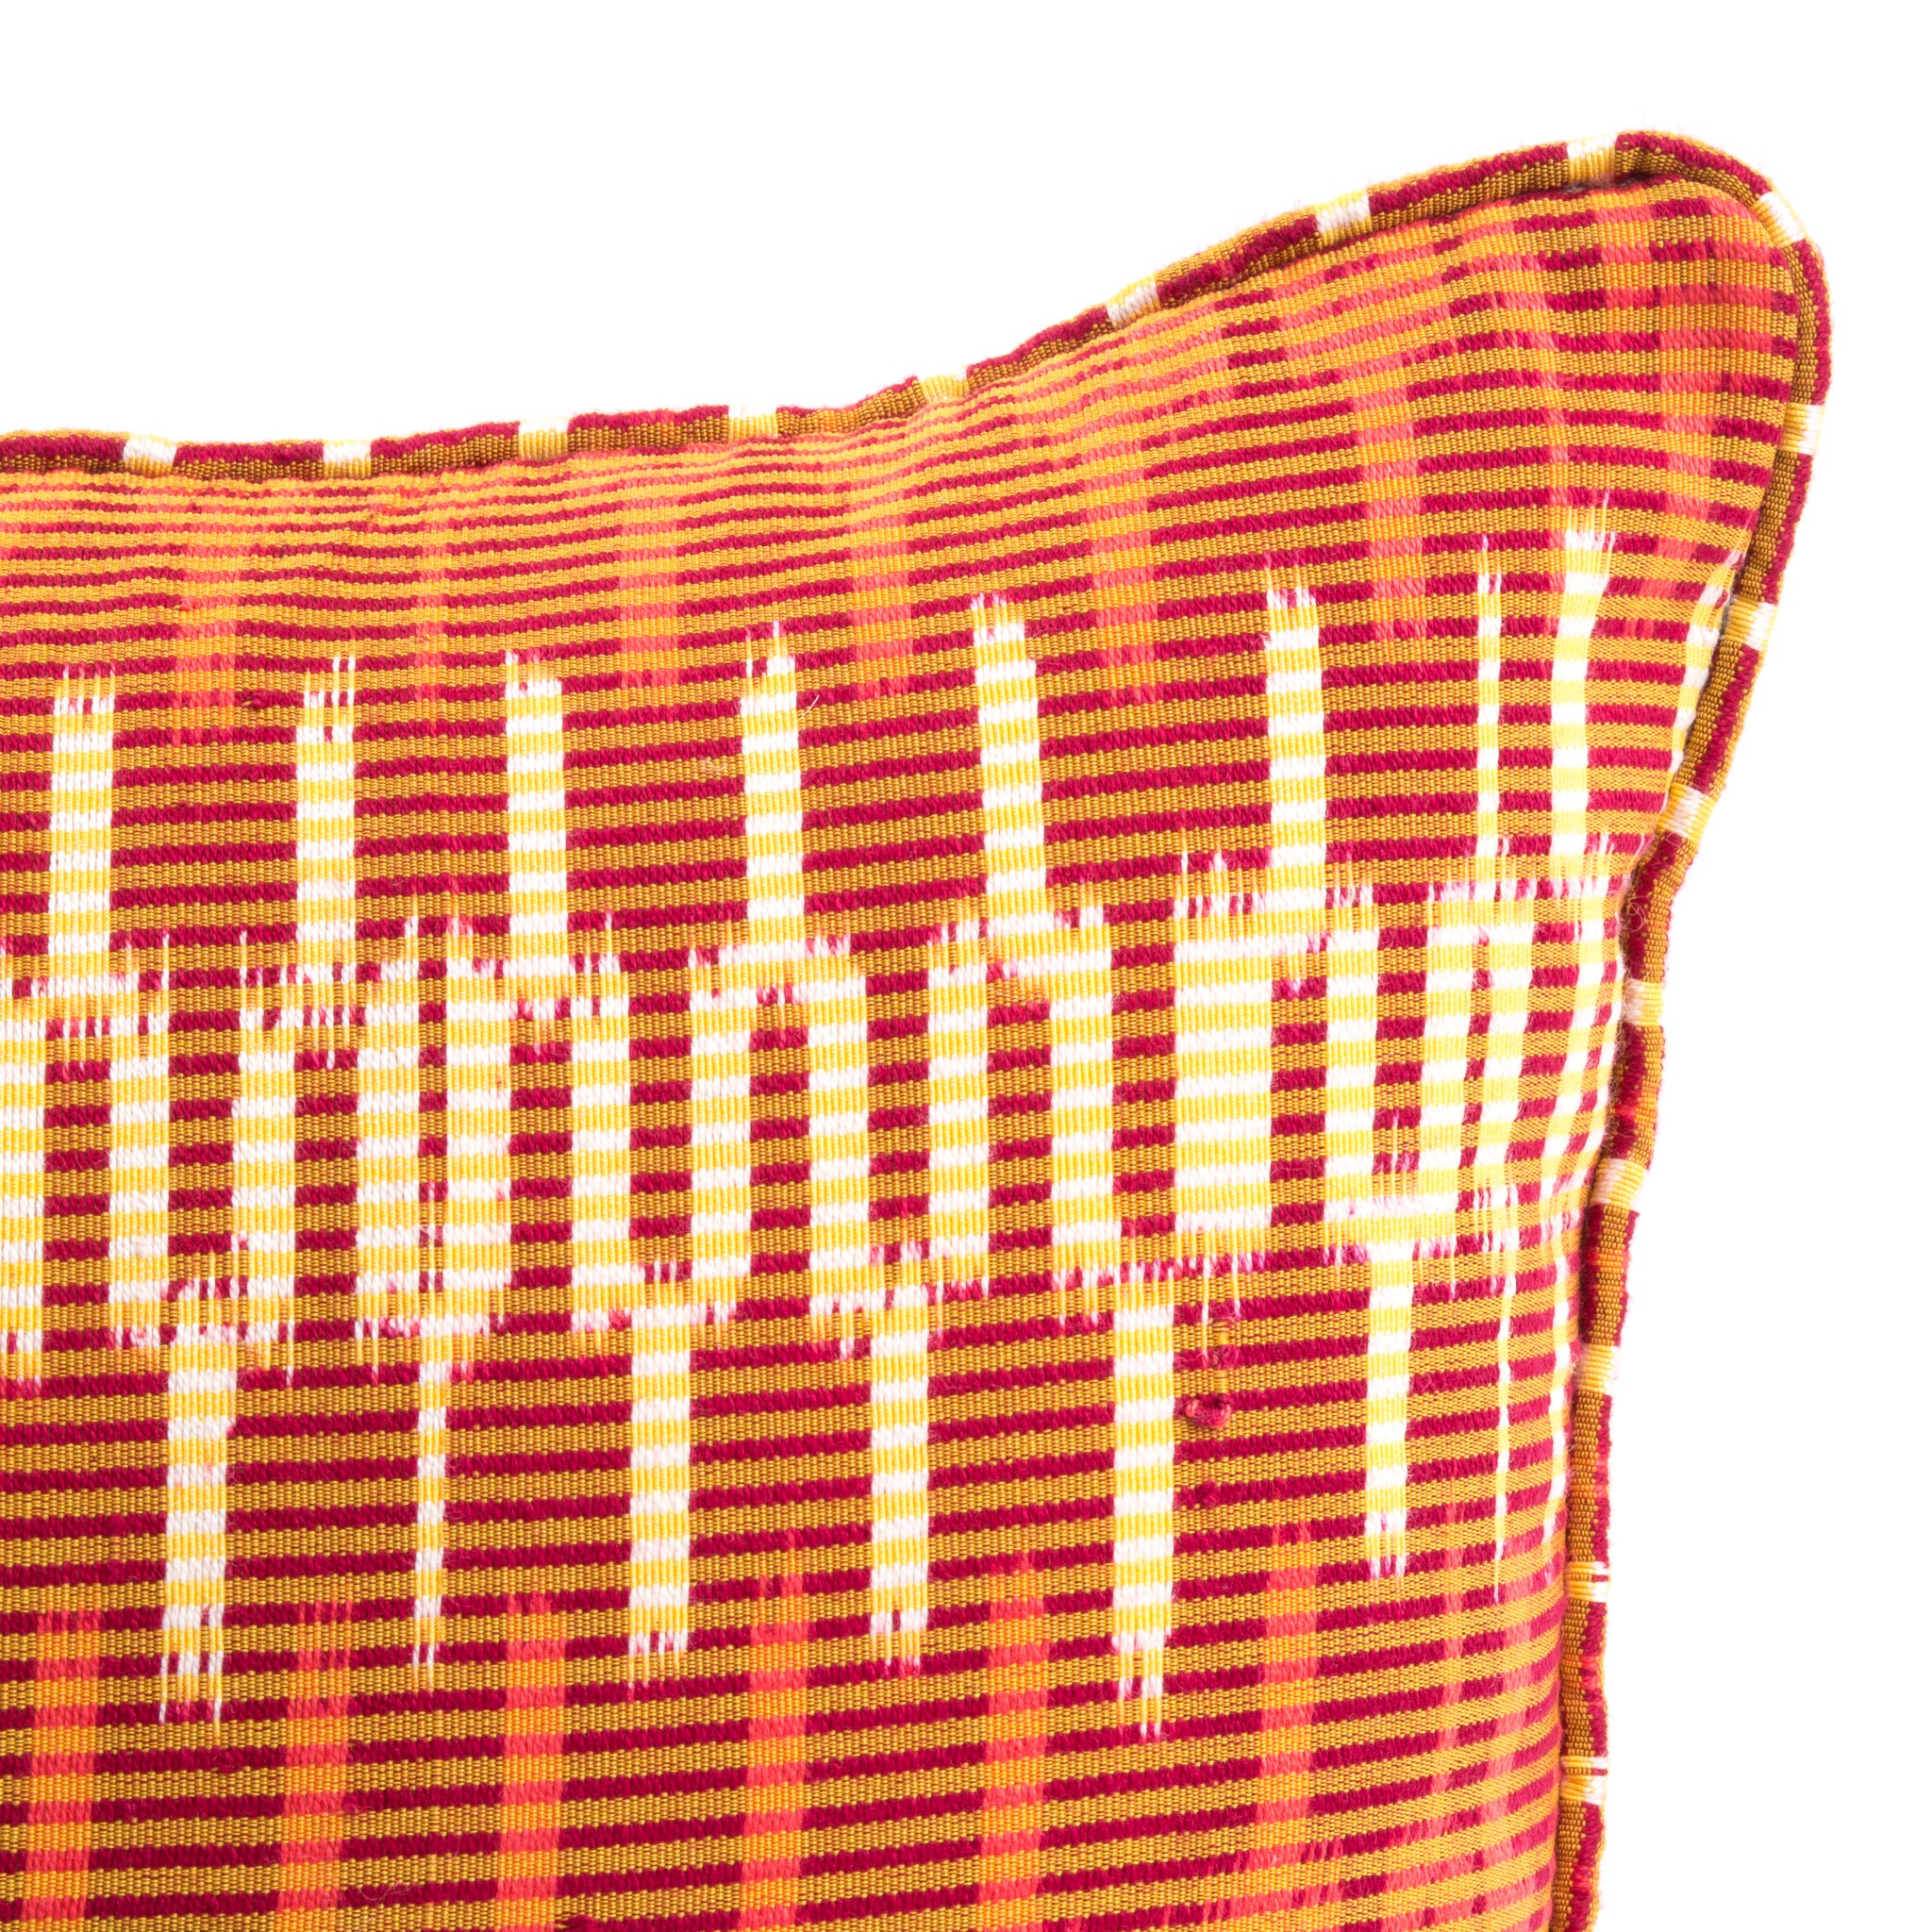 Orange and Cream Patterned Ikat Square Scatter Cushion from Bali, Indonesia- DETAIL